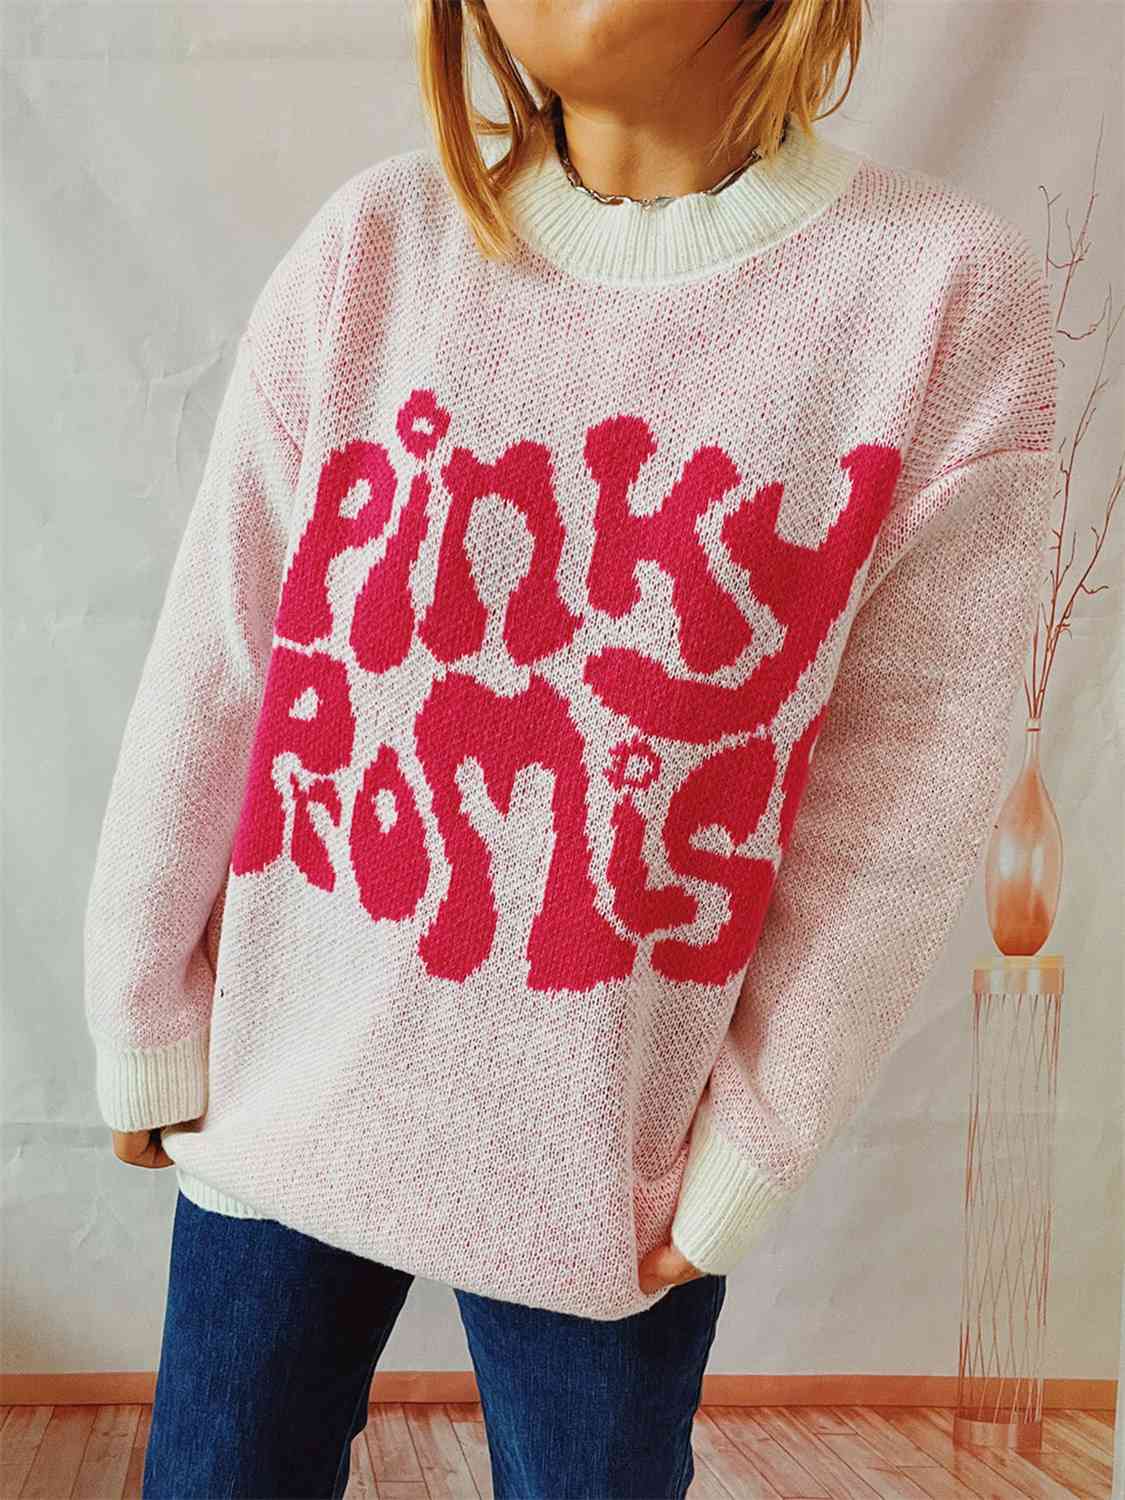 PINKY PROMISE Graphic Sweater - Sweaters - Shirts & Tops - 9 - 2024